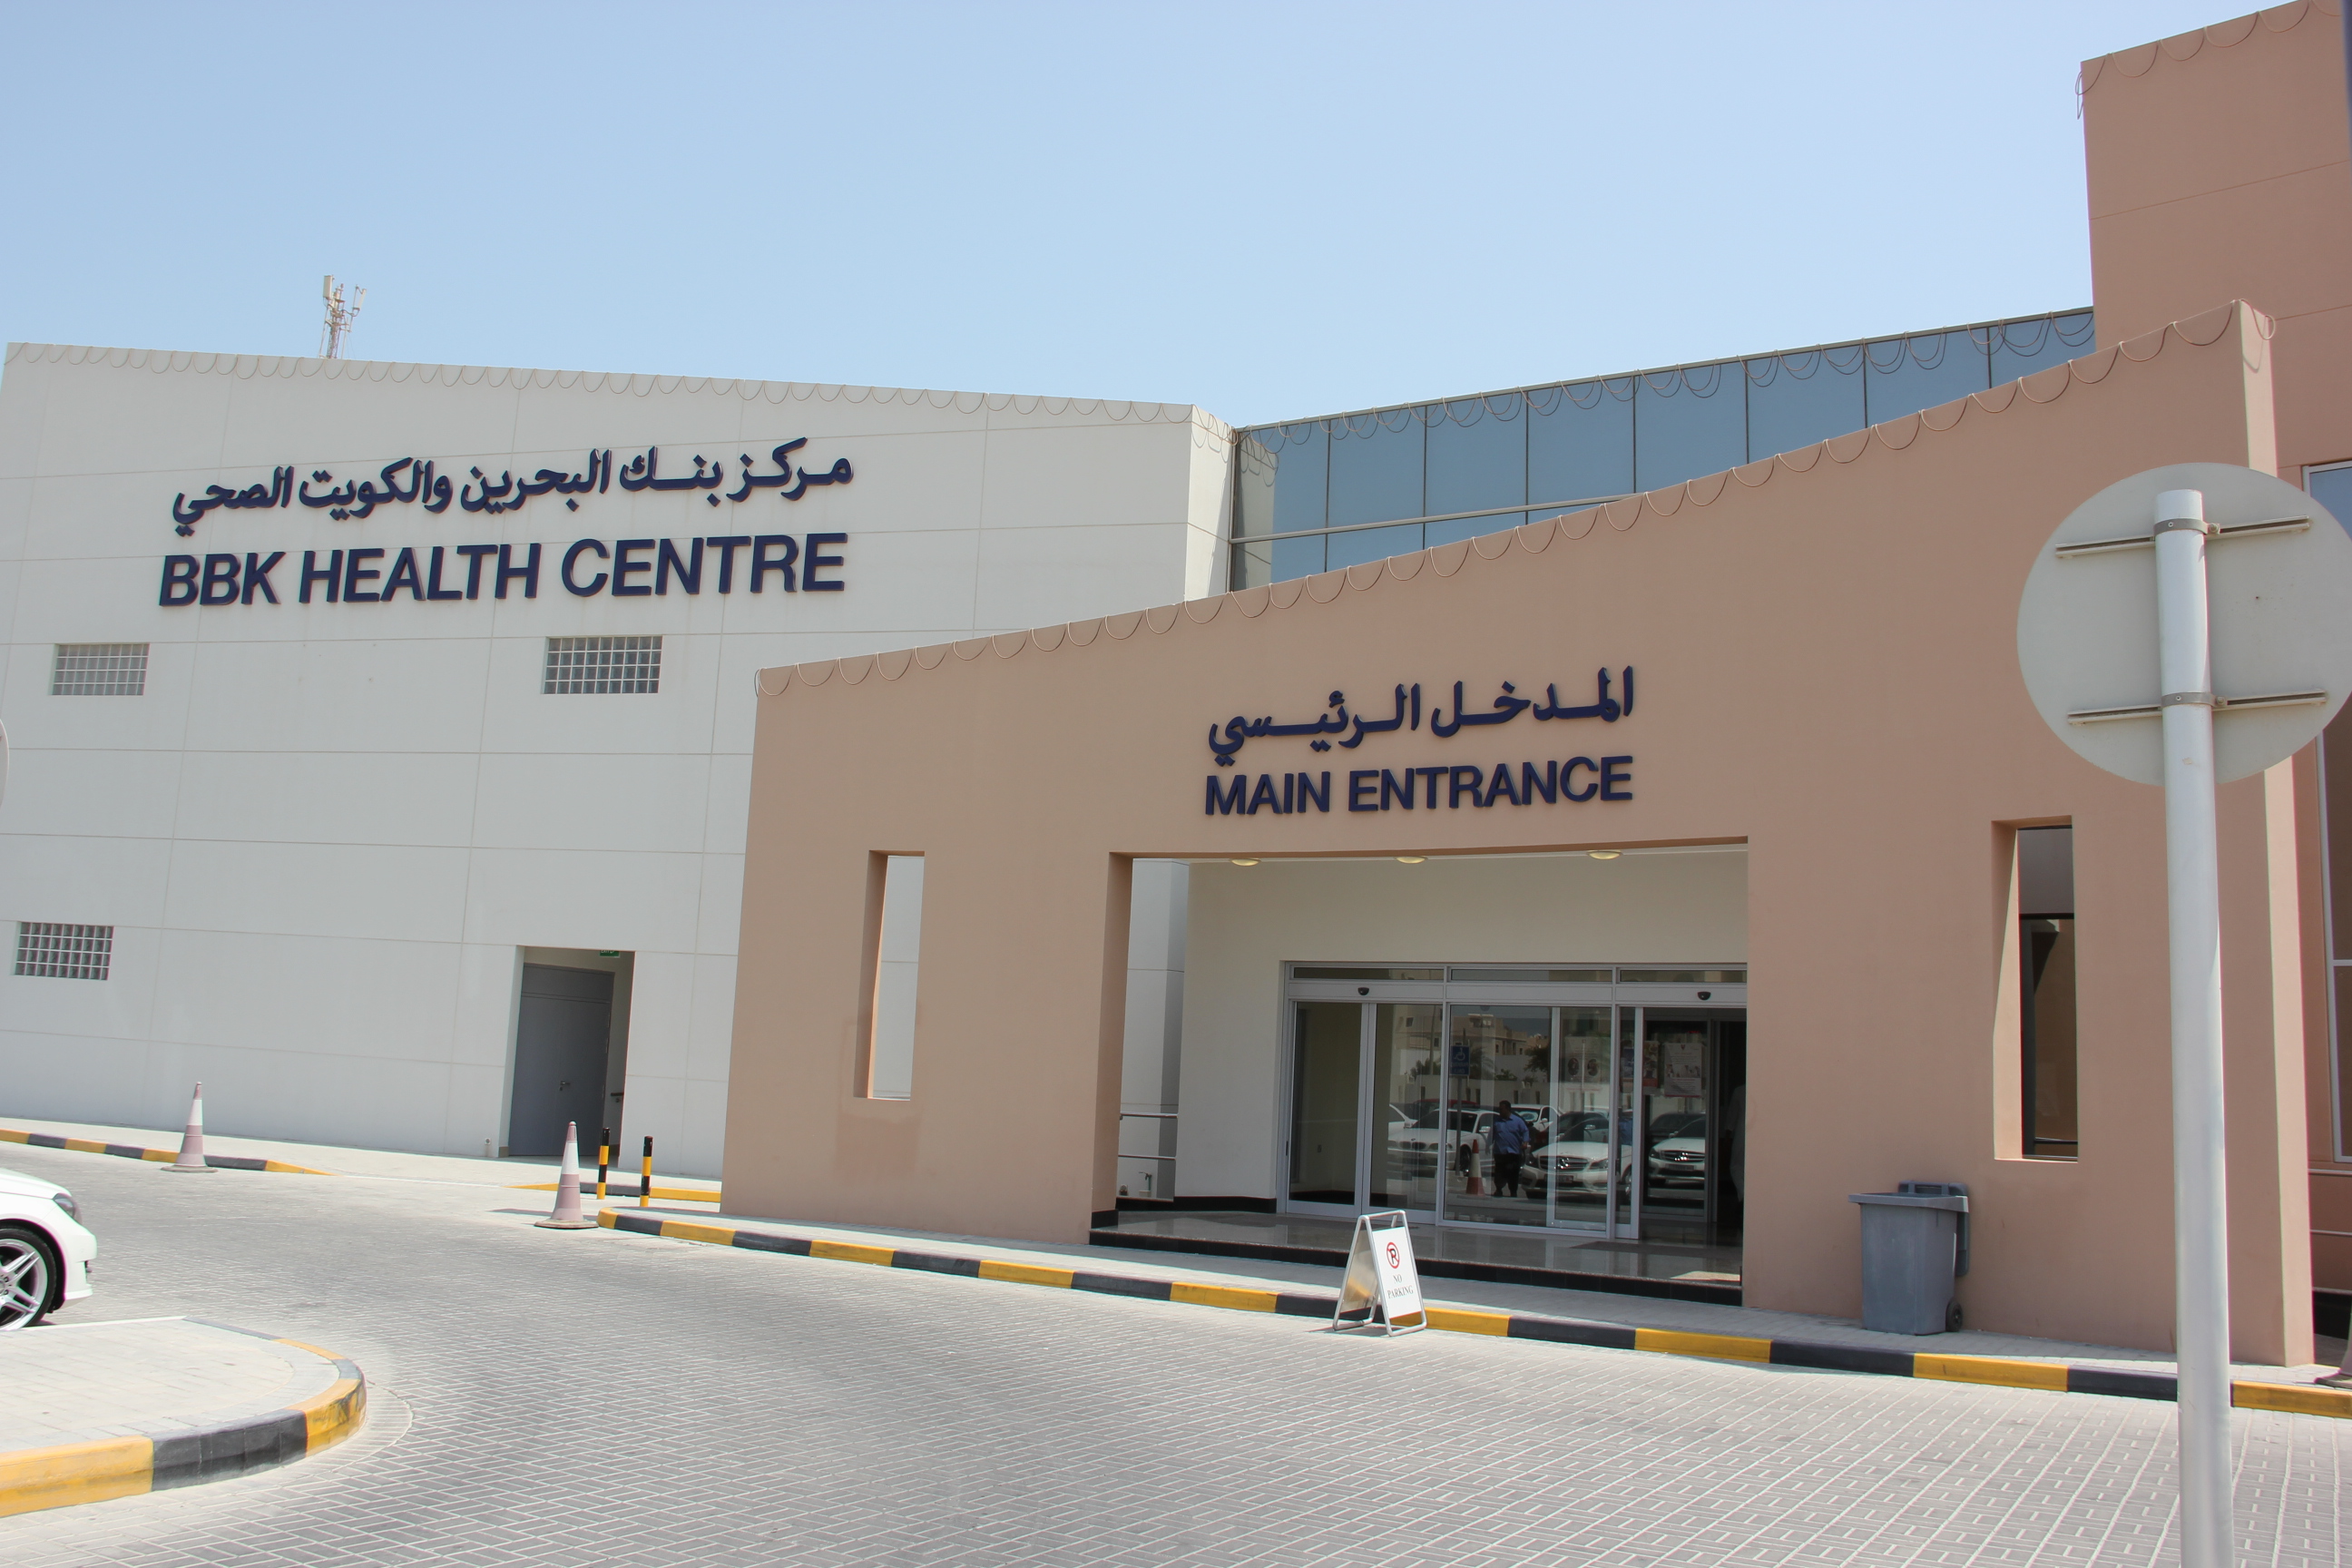 Official launch of the first version of the national health information system (I-Seha) at BBK Hidd health center